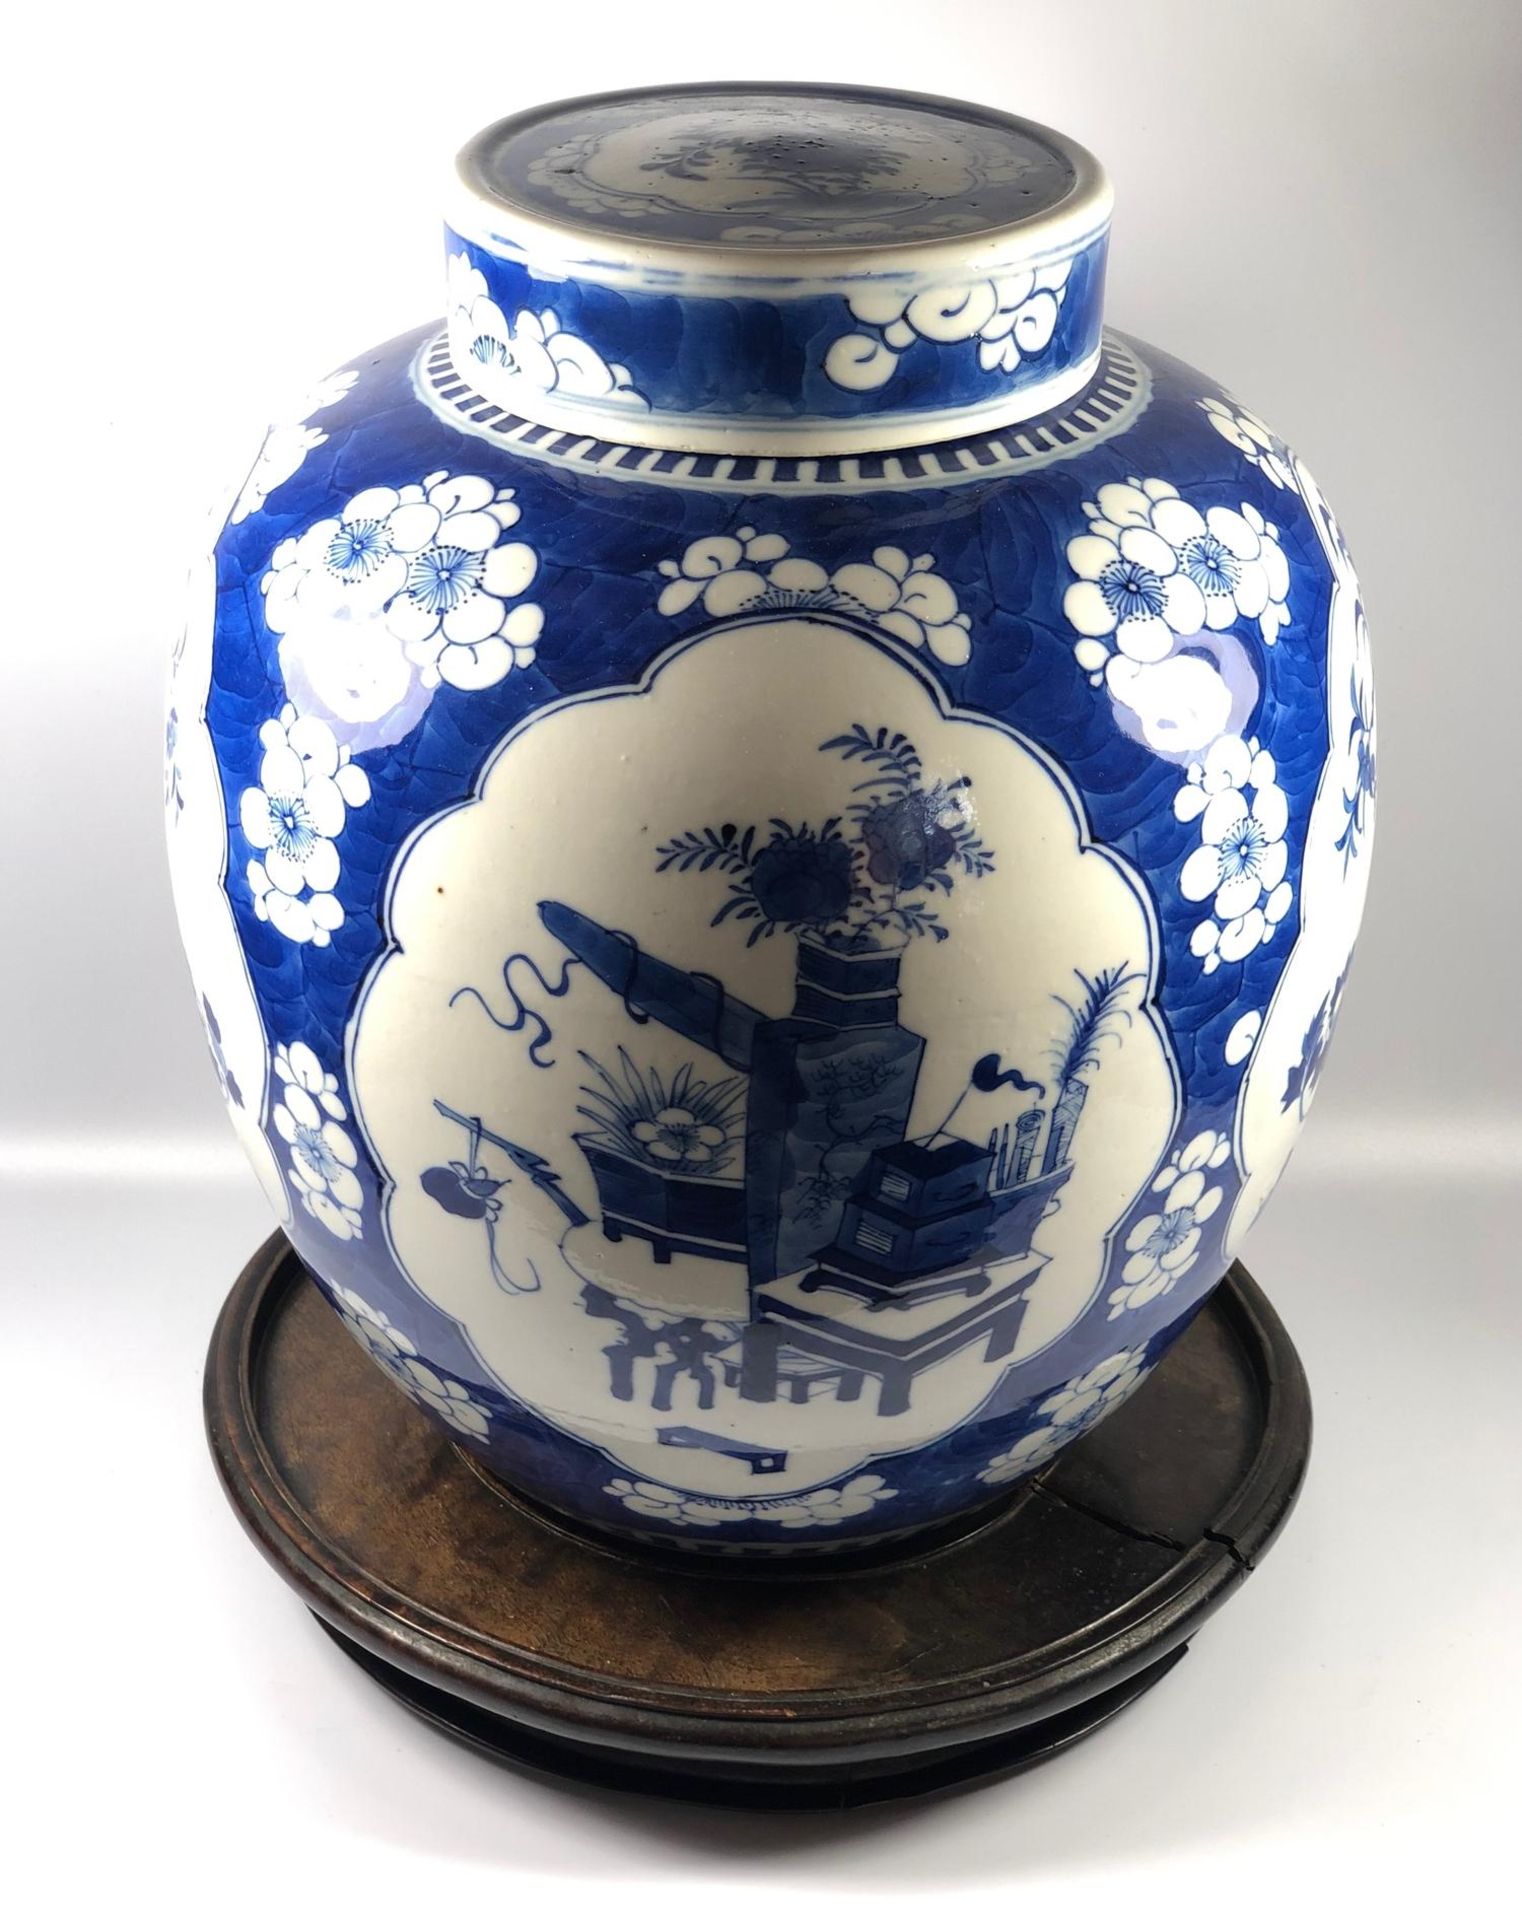 A LARGE CHINESE 19TH CENTURY BLUE AND WHIE PRUNUS OBJECTS PATTERN GINGER JAR ON CARVED ORIENTAL